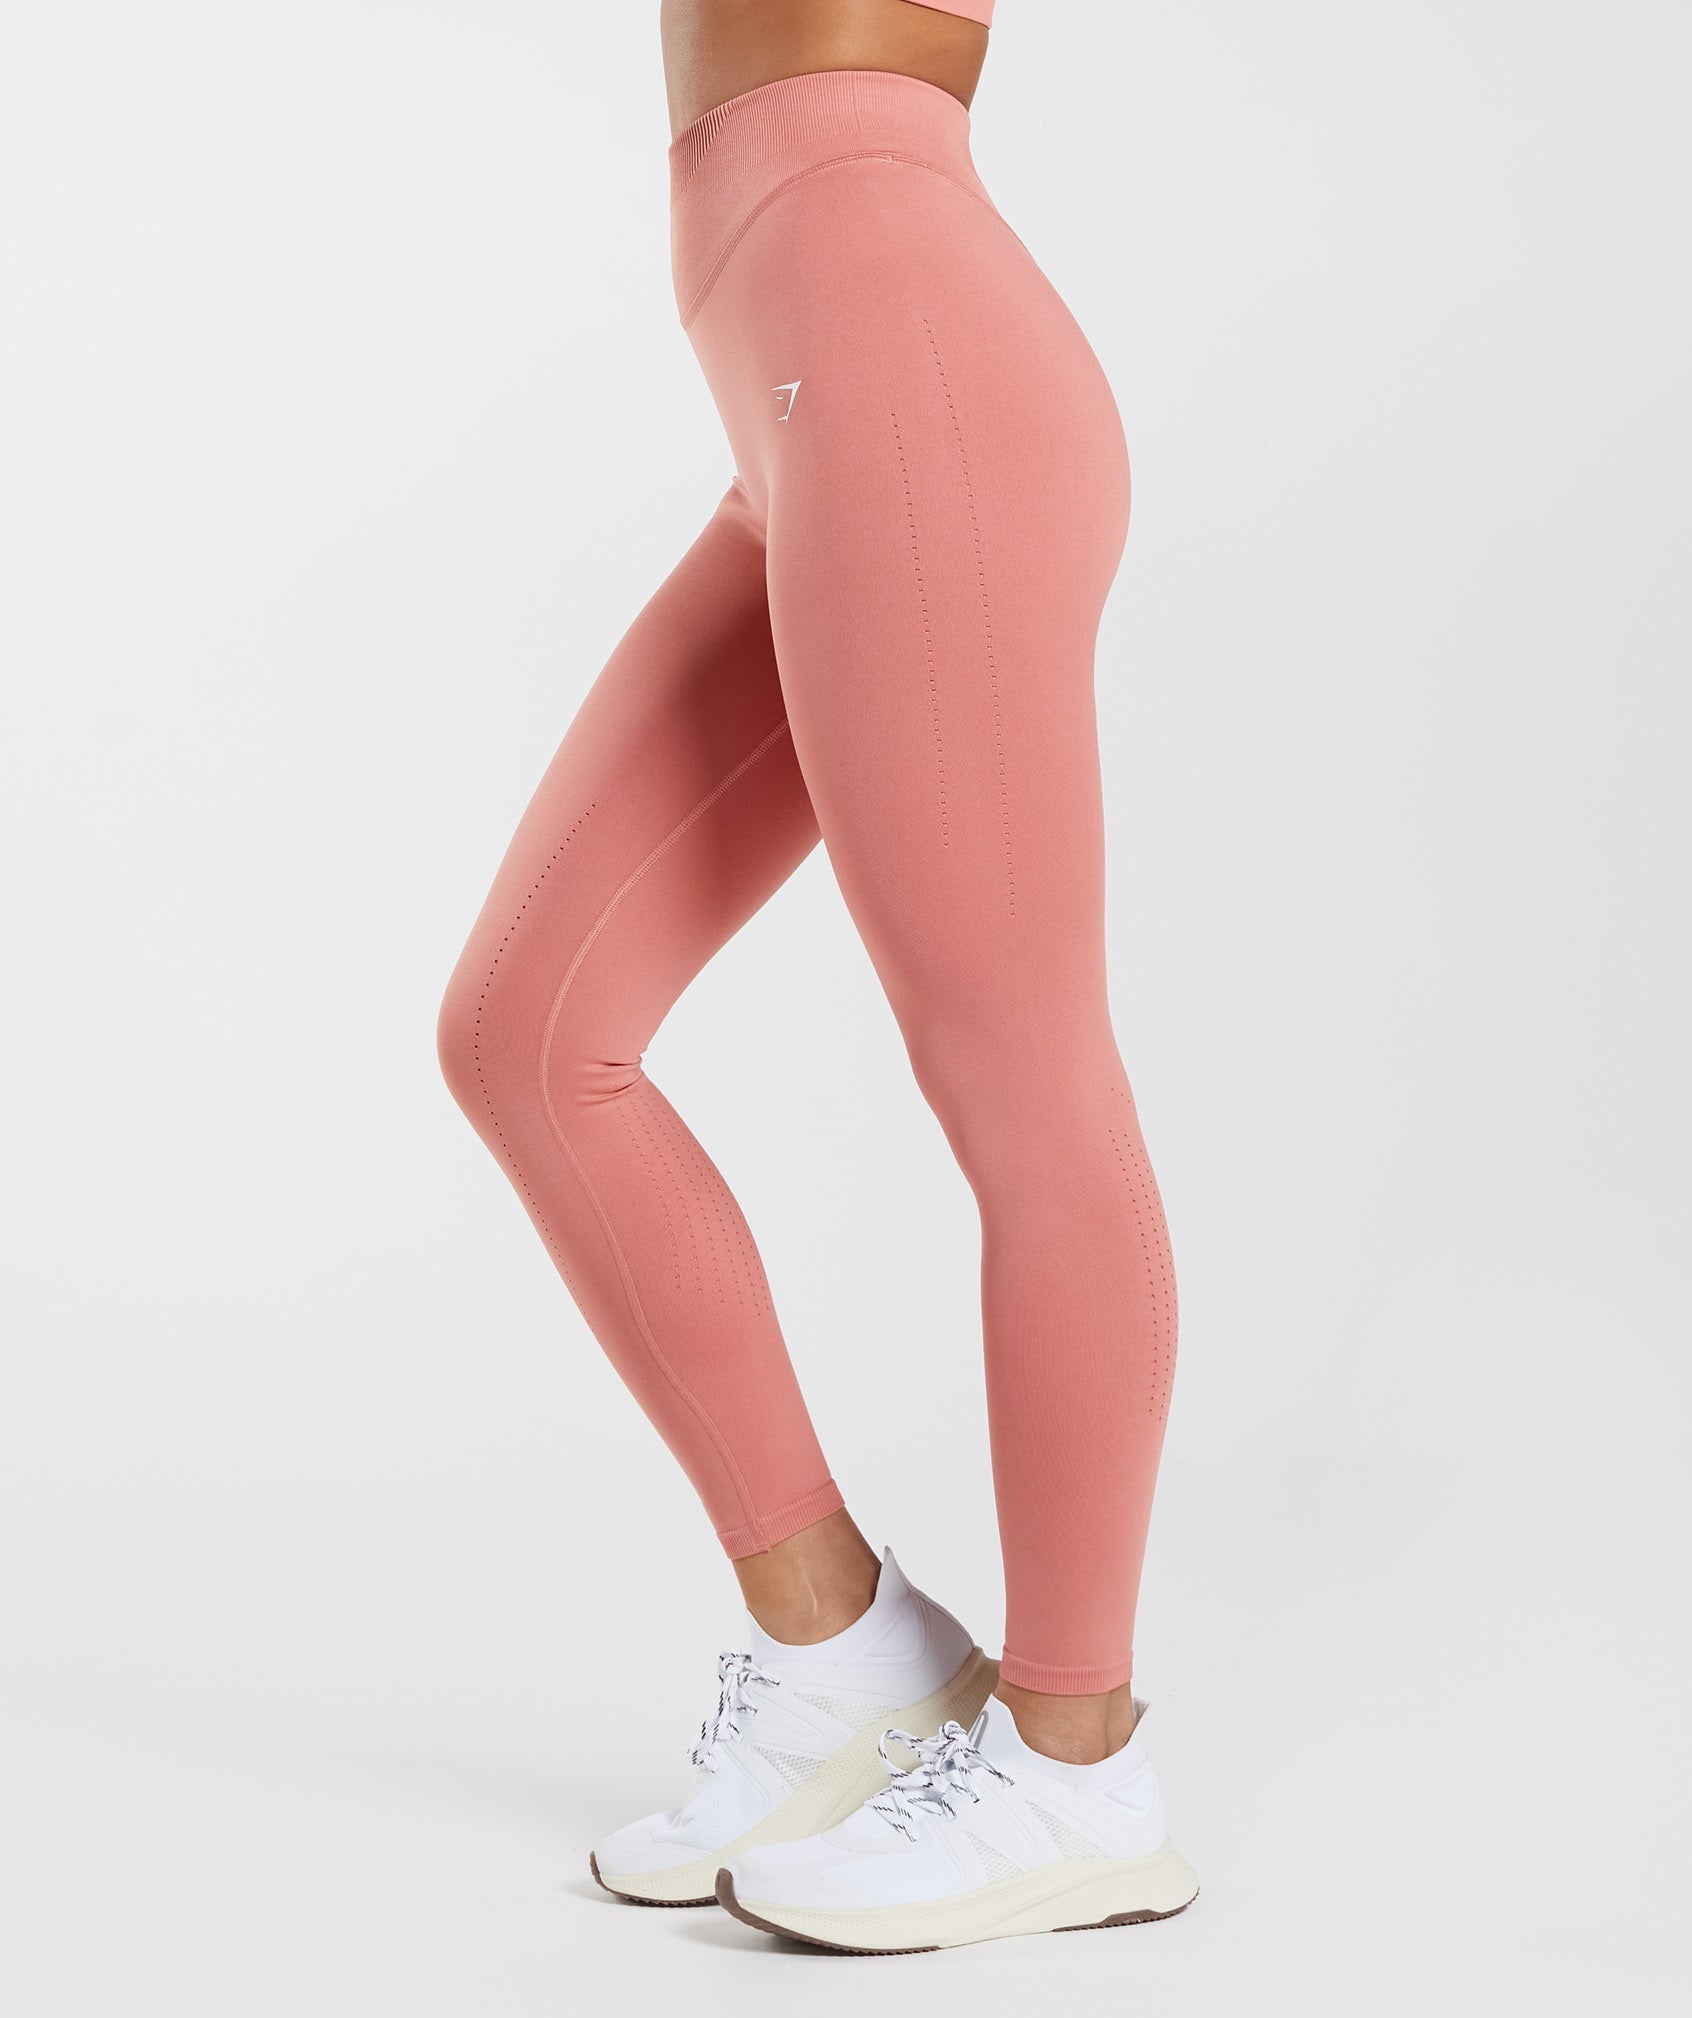 Gymshark Legacy Fitness Panel Leggings Pink Size L - $36 (40% Off Retail) -  From leah